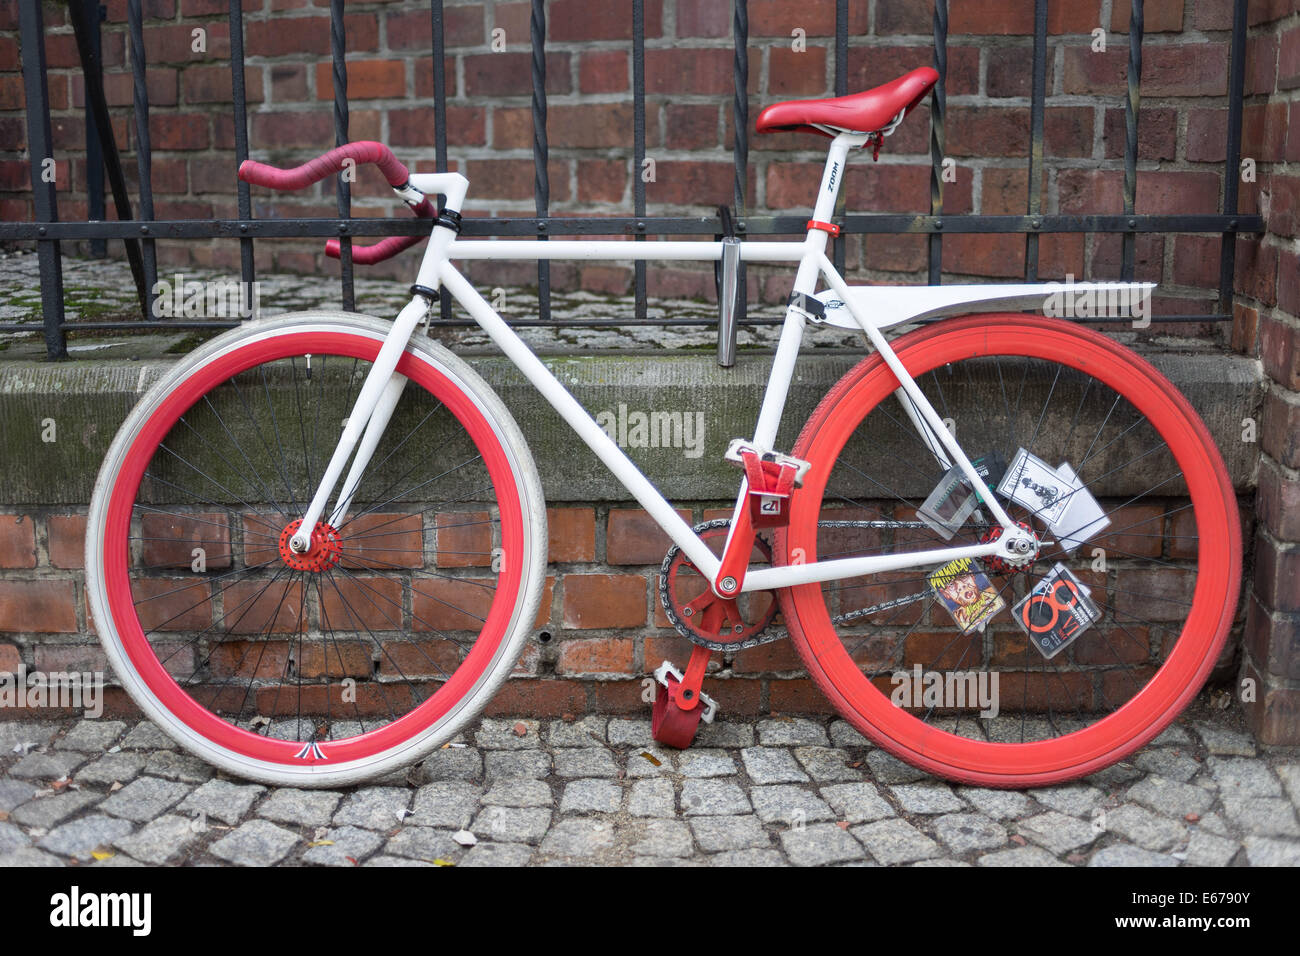 The bike with red bonnet,wheels,saddle and white chassis Stock Photo